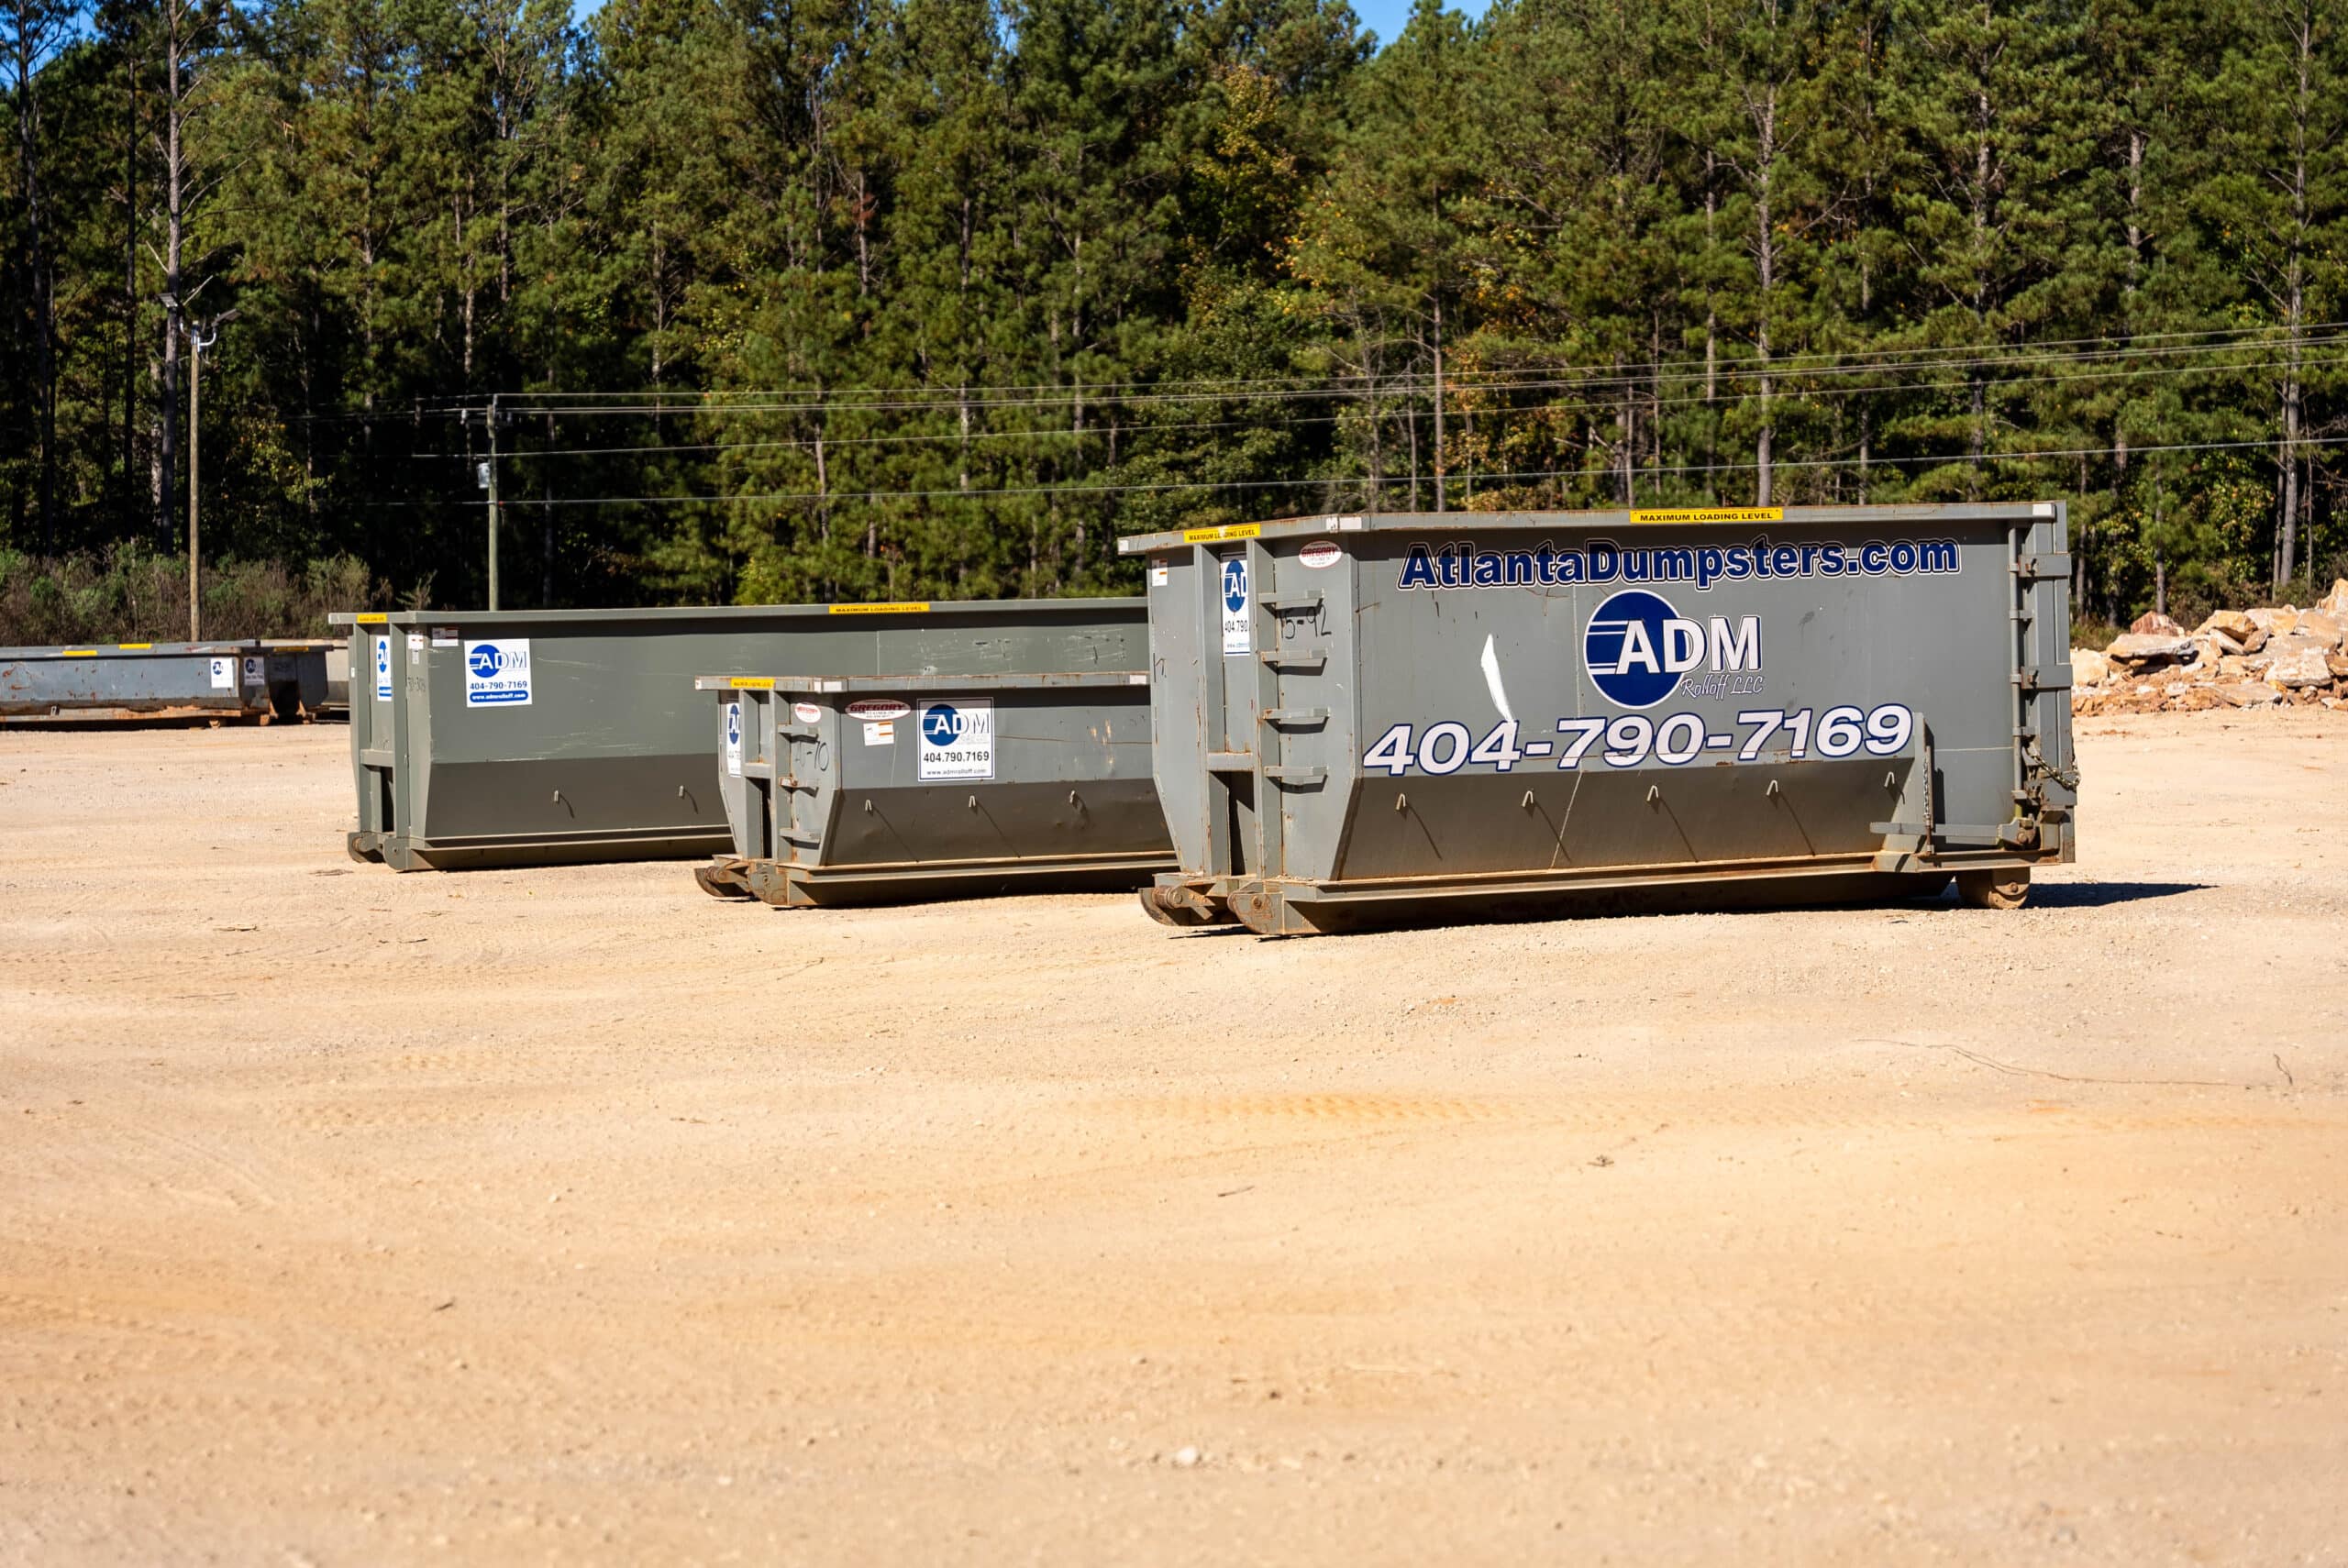 Demystifying Dumpster Sizes: Choosing the Right Roll-off Dumpster for Your Project